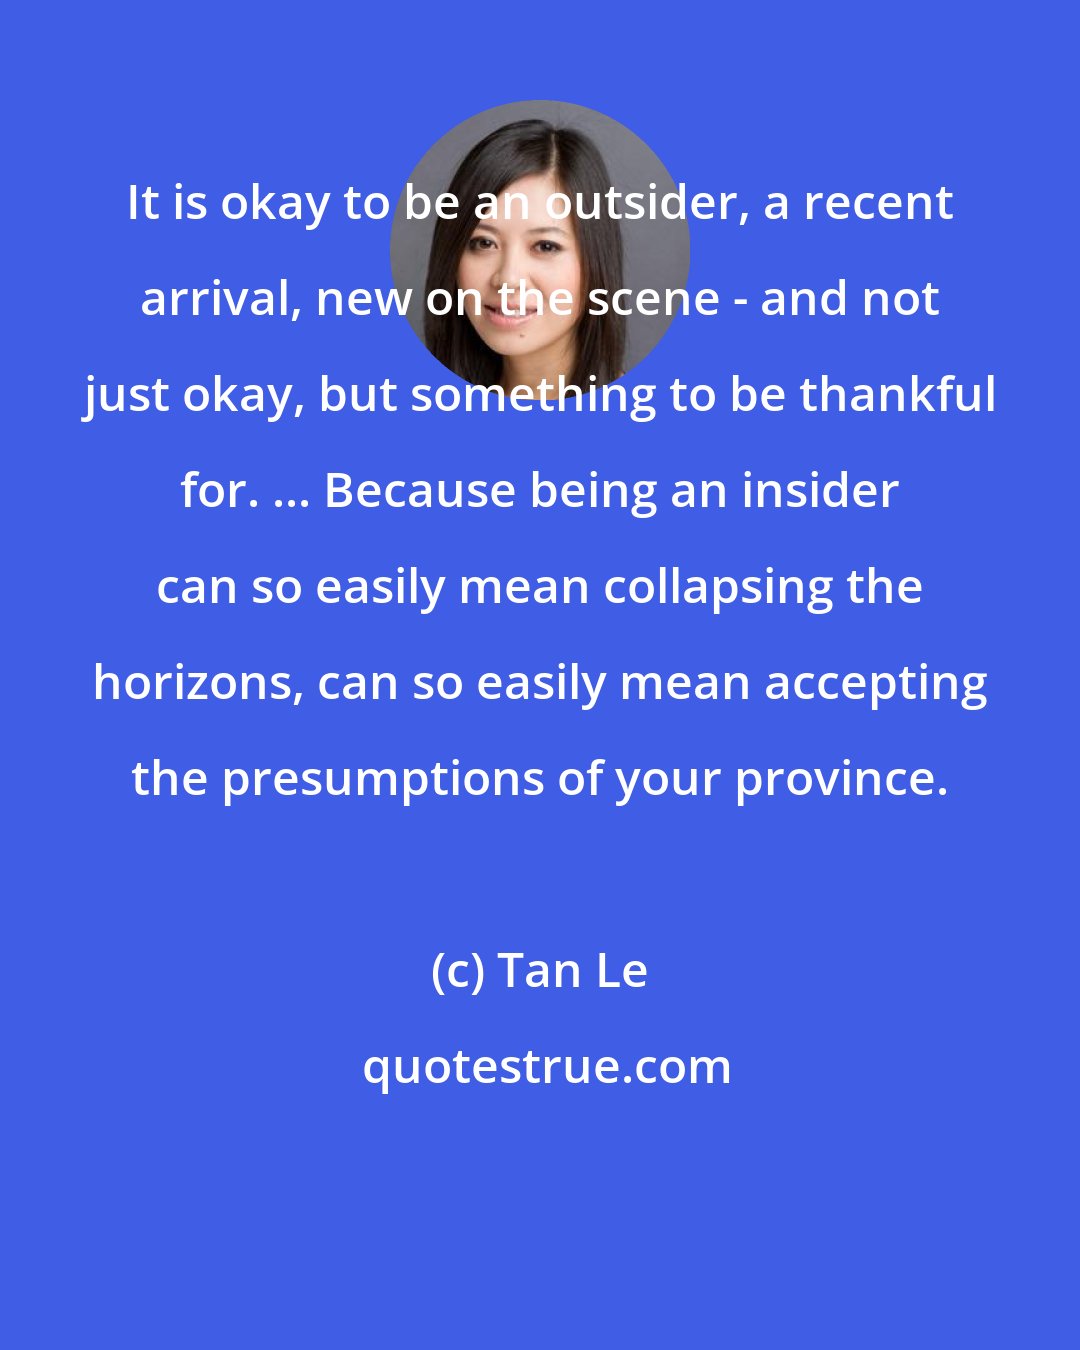 Tan Le: It is okay to be an outsider, a recent arrival, new on the scene - and not just okay, but something to be thankful for. ... Because being an insider can so easily mean collapsing the horizons, can so easily mean accepting the presumptions of your province.